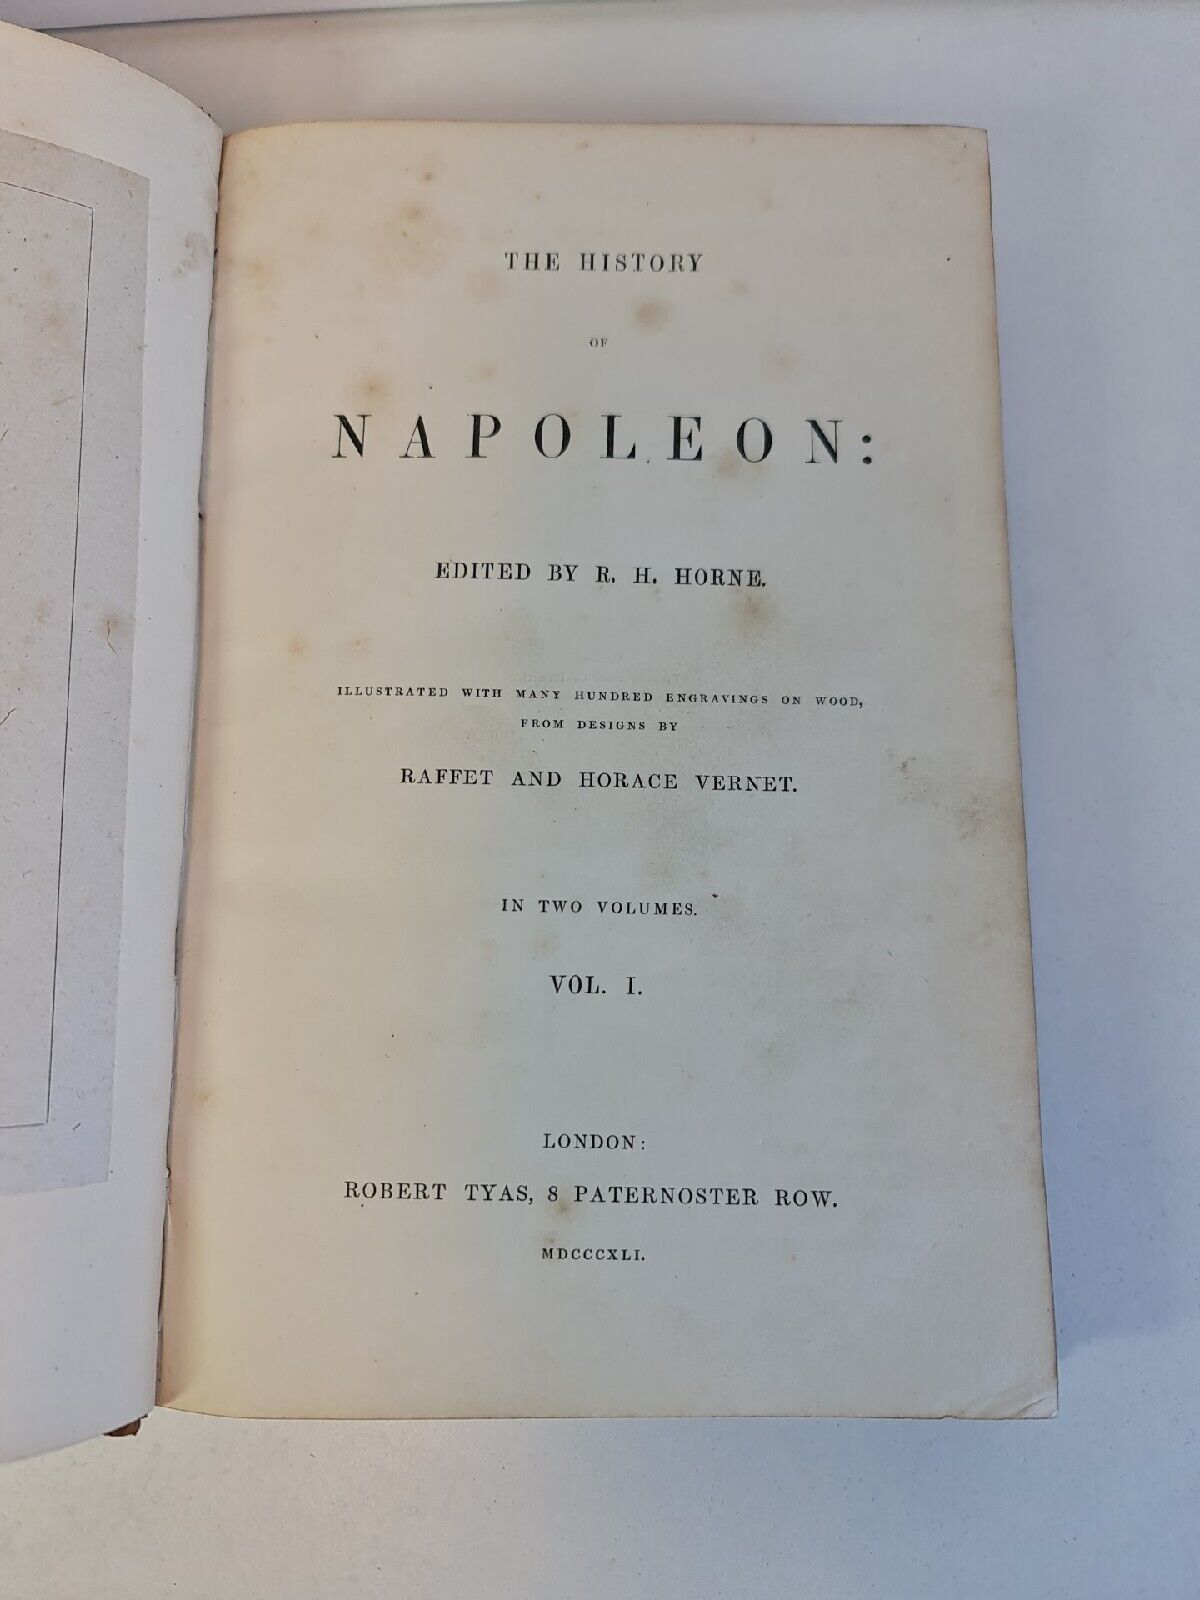 The History of Napoleon Vol 1 by Horne (1841)